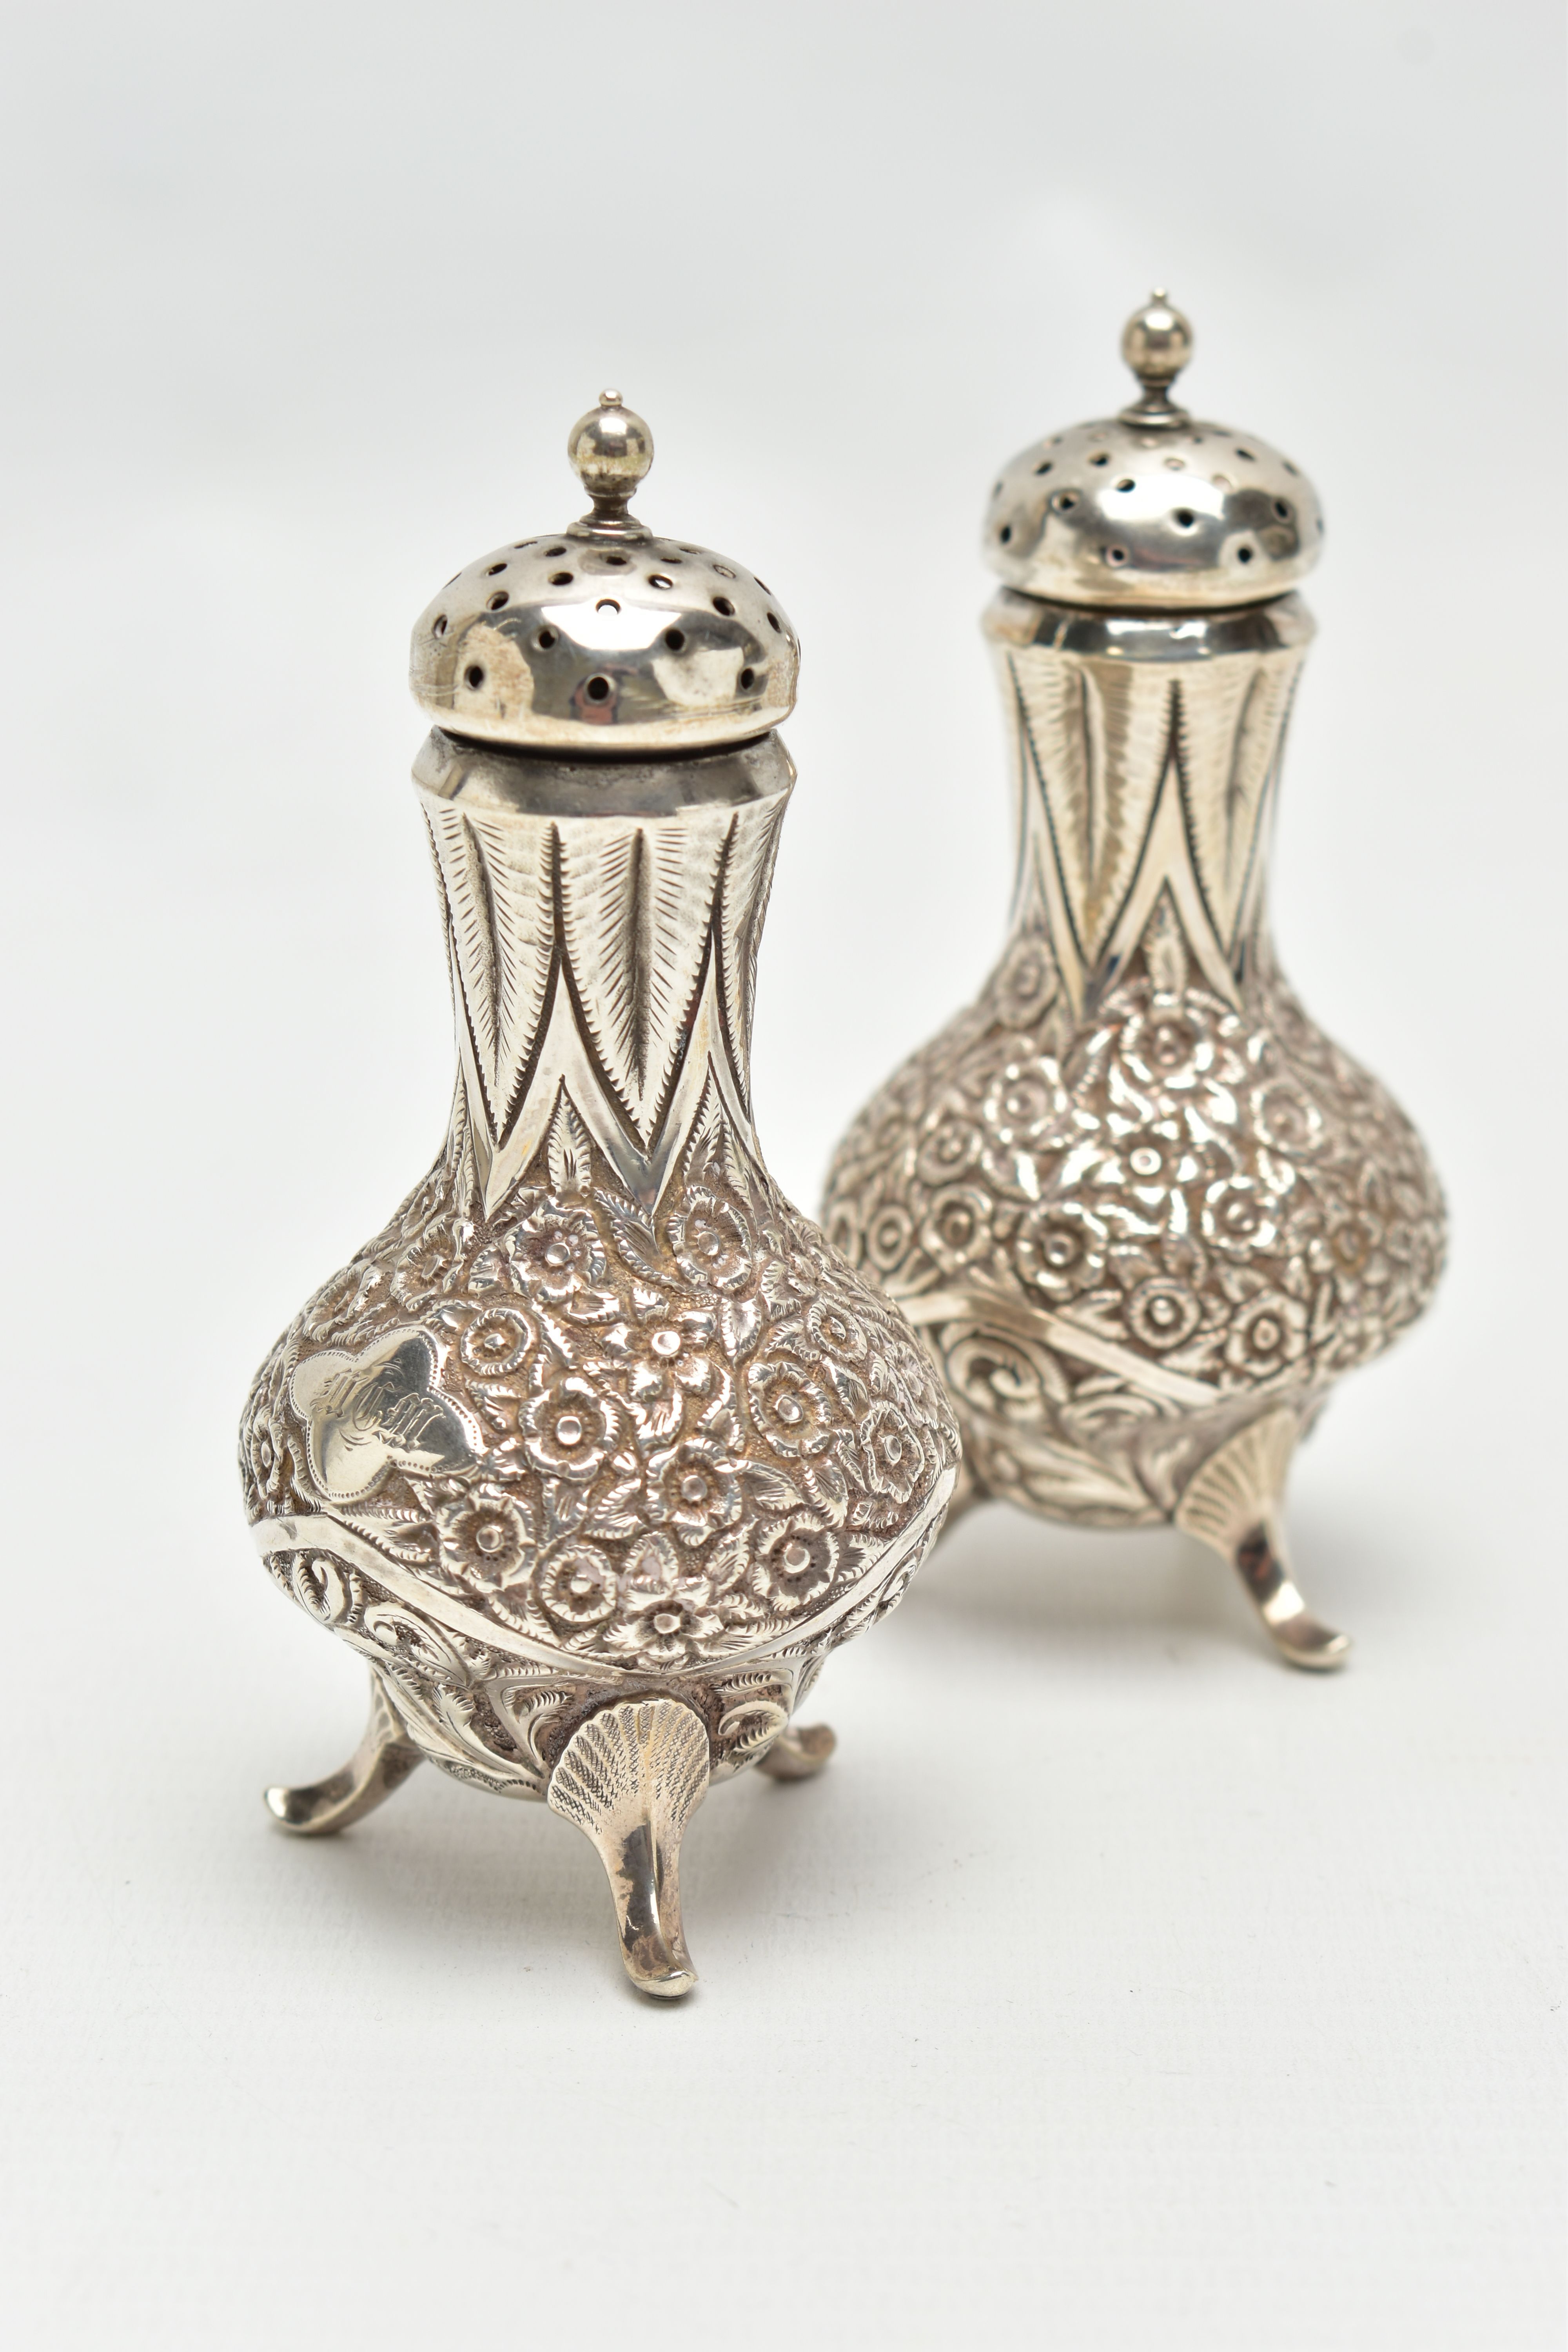 A PAIR OF WHITE METAL PEPPERETTES, baluster form, decorated with a floral and foliate pattern, - Image 2 of 4